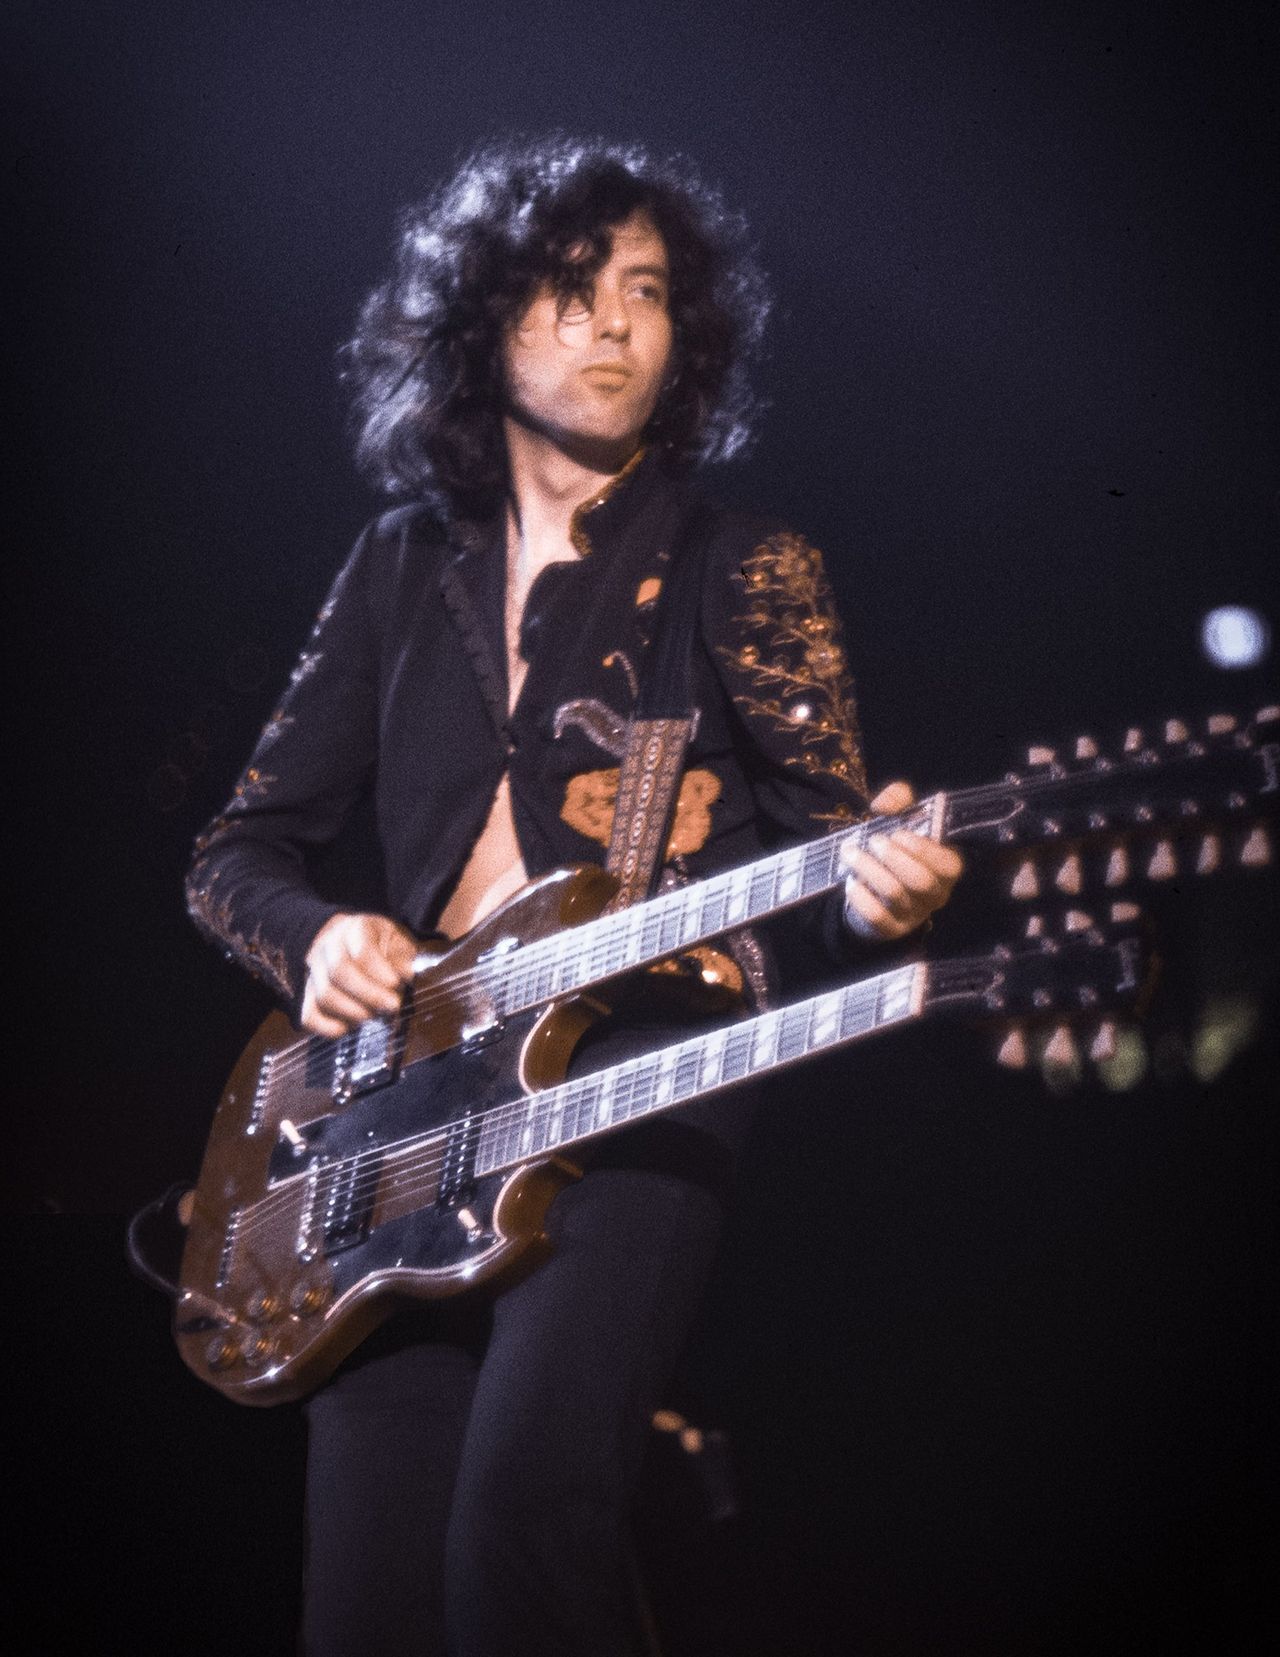 Happy birthday to maestro Jimmy Page who turns 75 today! Kevin Goff 